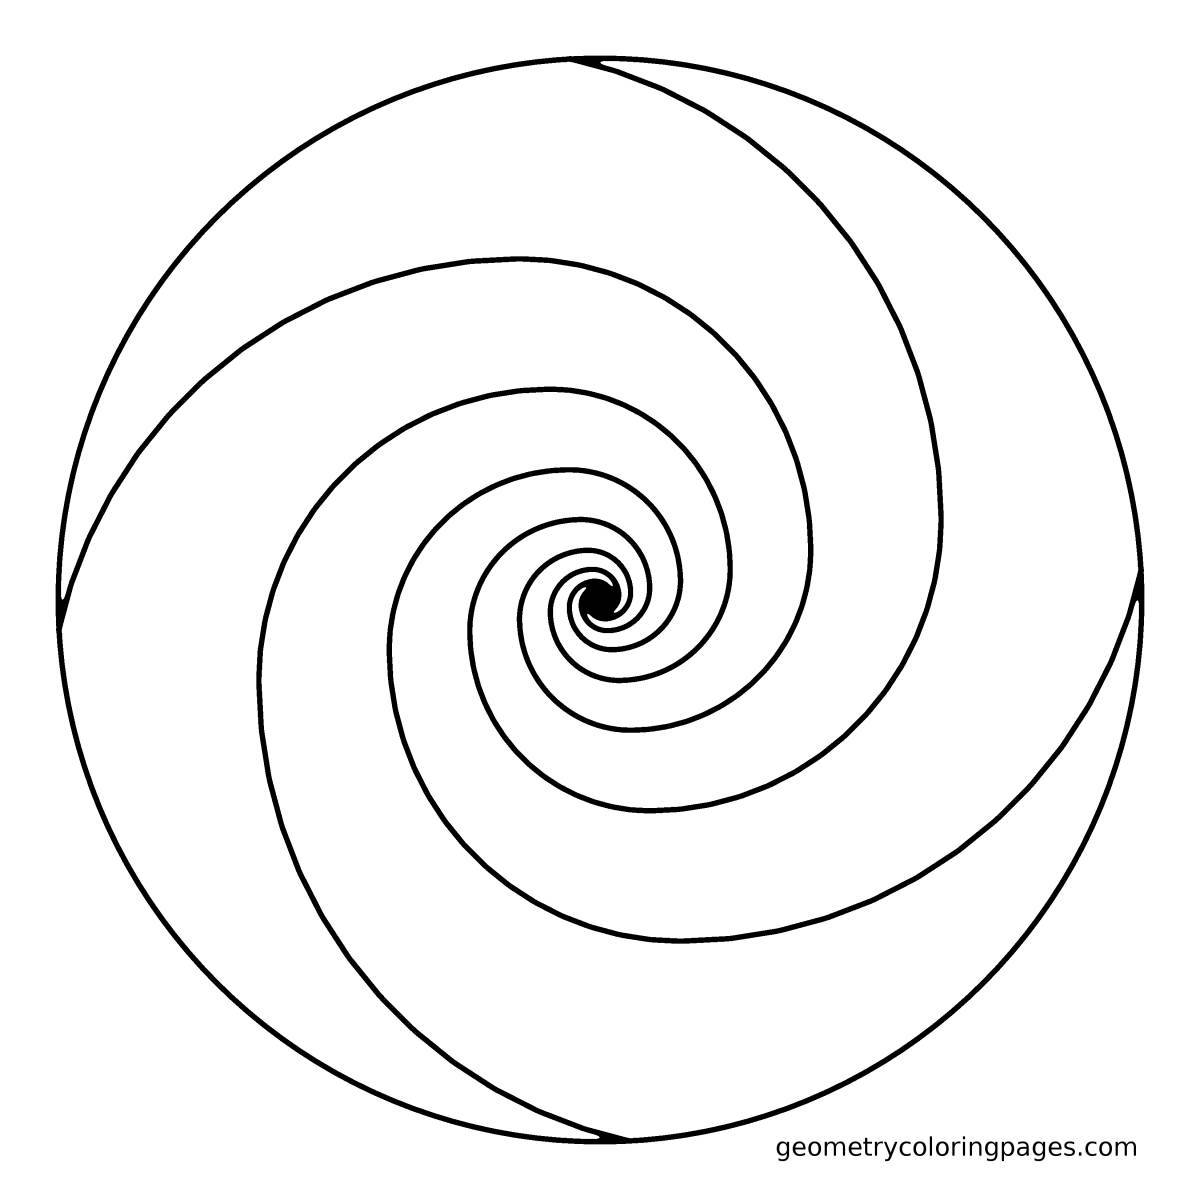 Exciting spiral coloring